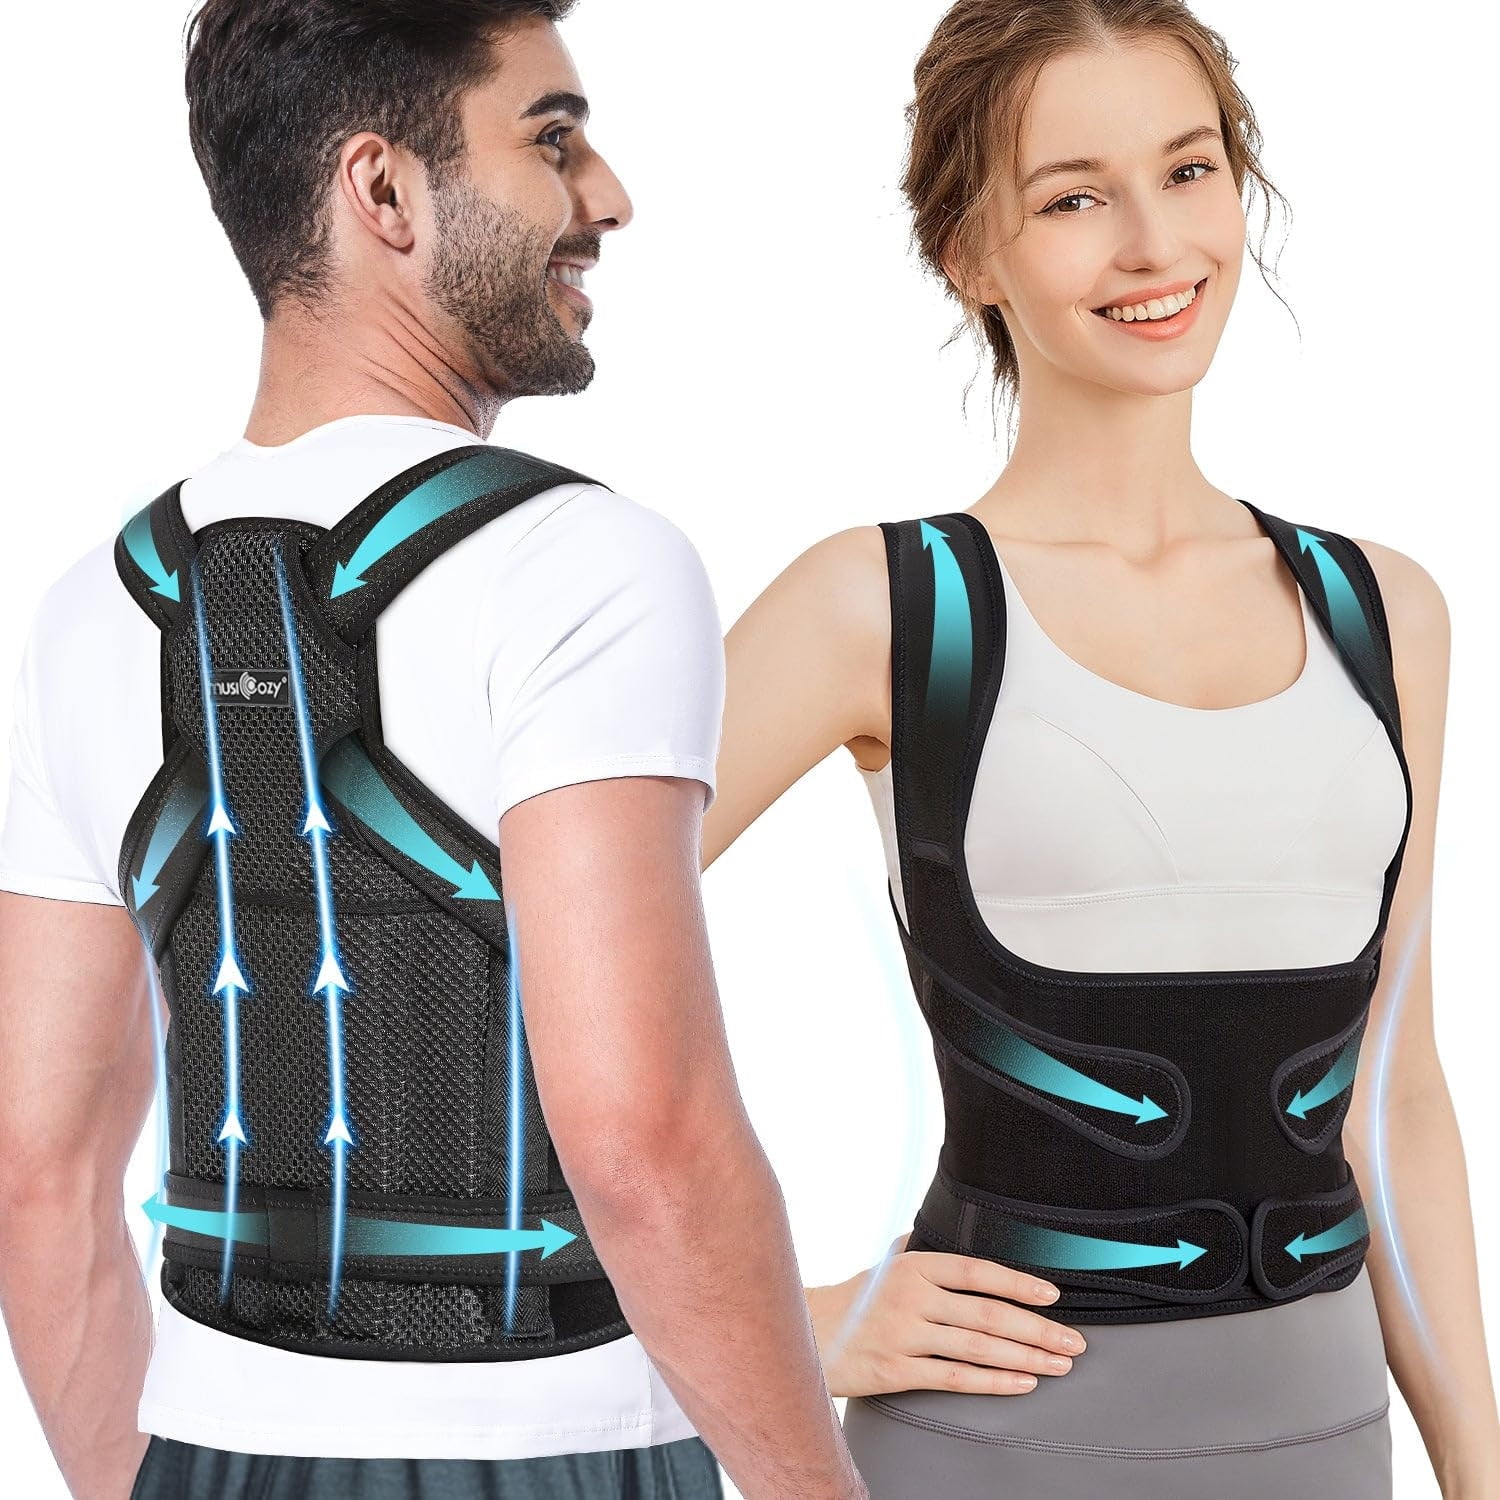 DIANMEI Back Brace Posture Corrector for Women and Men, Back Braces for  Upper and Lower Back Pain Relief, Adjustable and Fully Back Support Improve Back  Posture and Lumbar Support(M, 30-35.5 Waist) Medium (